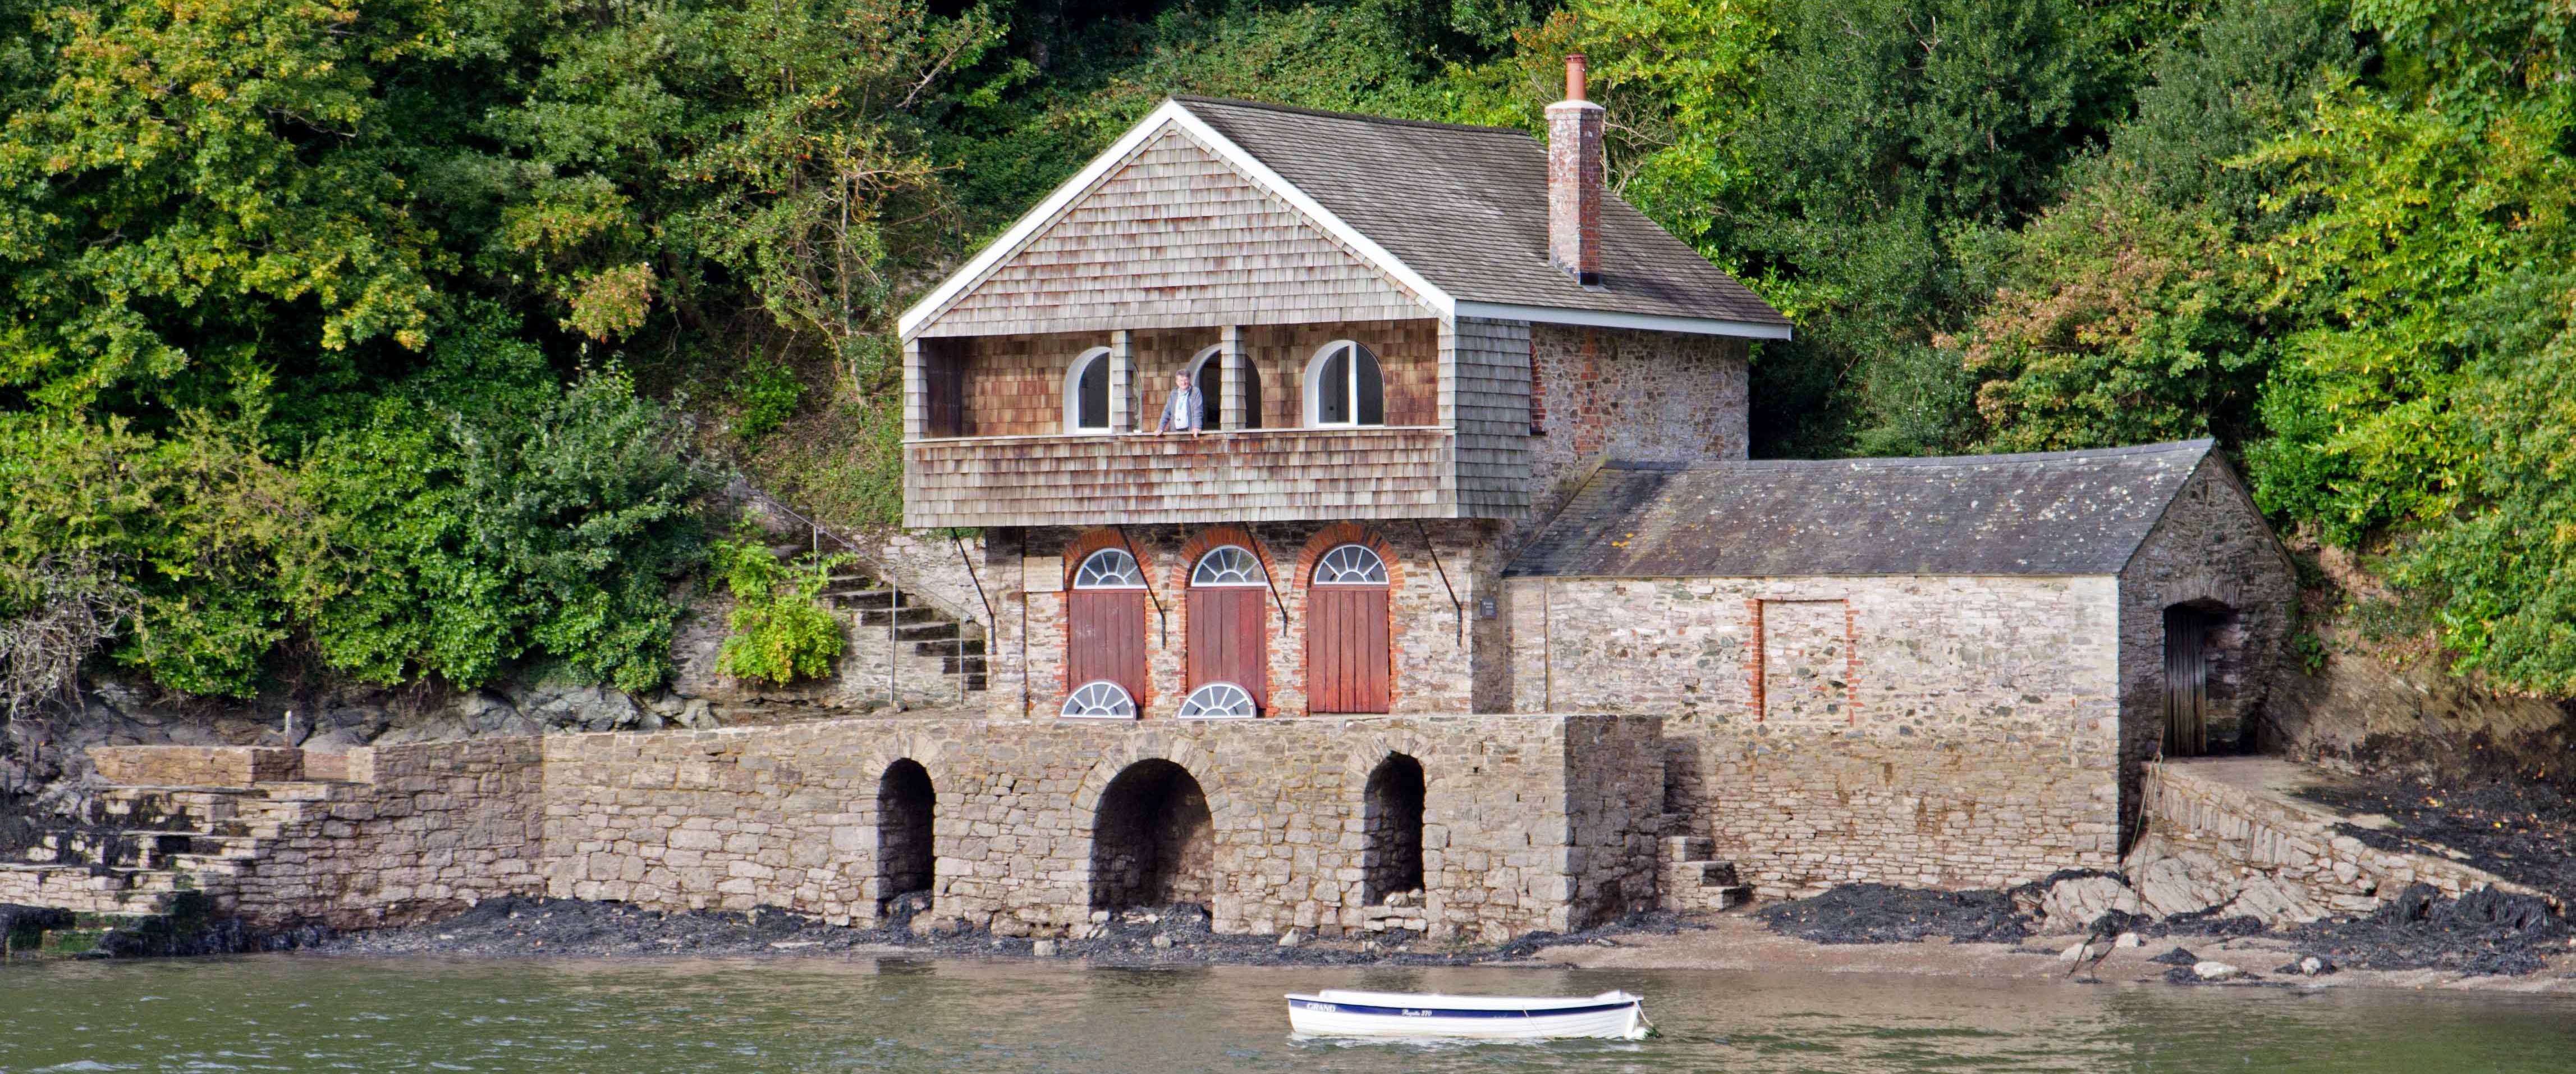 The Boathouse at Greenway in Devon